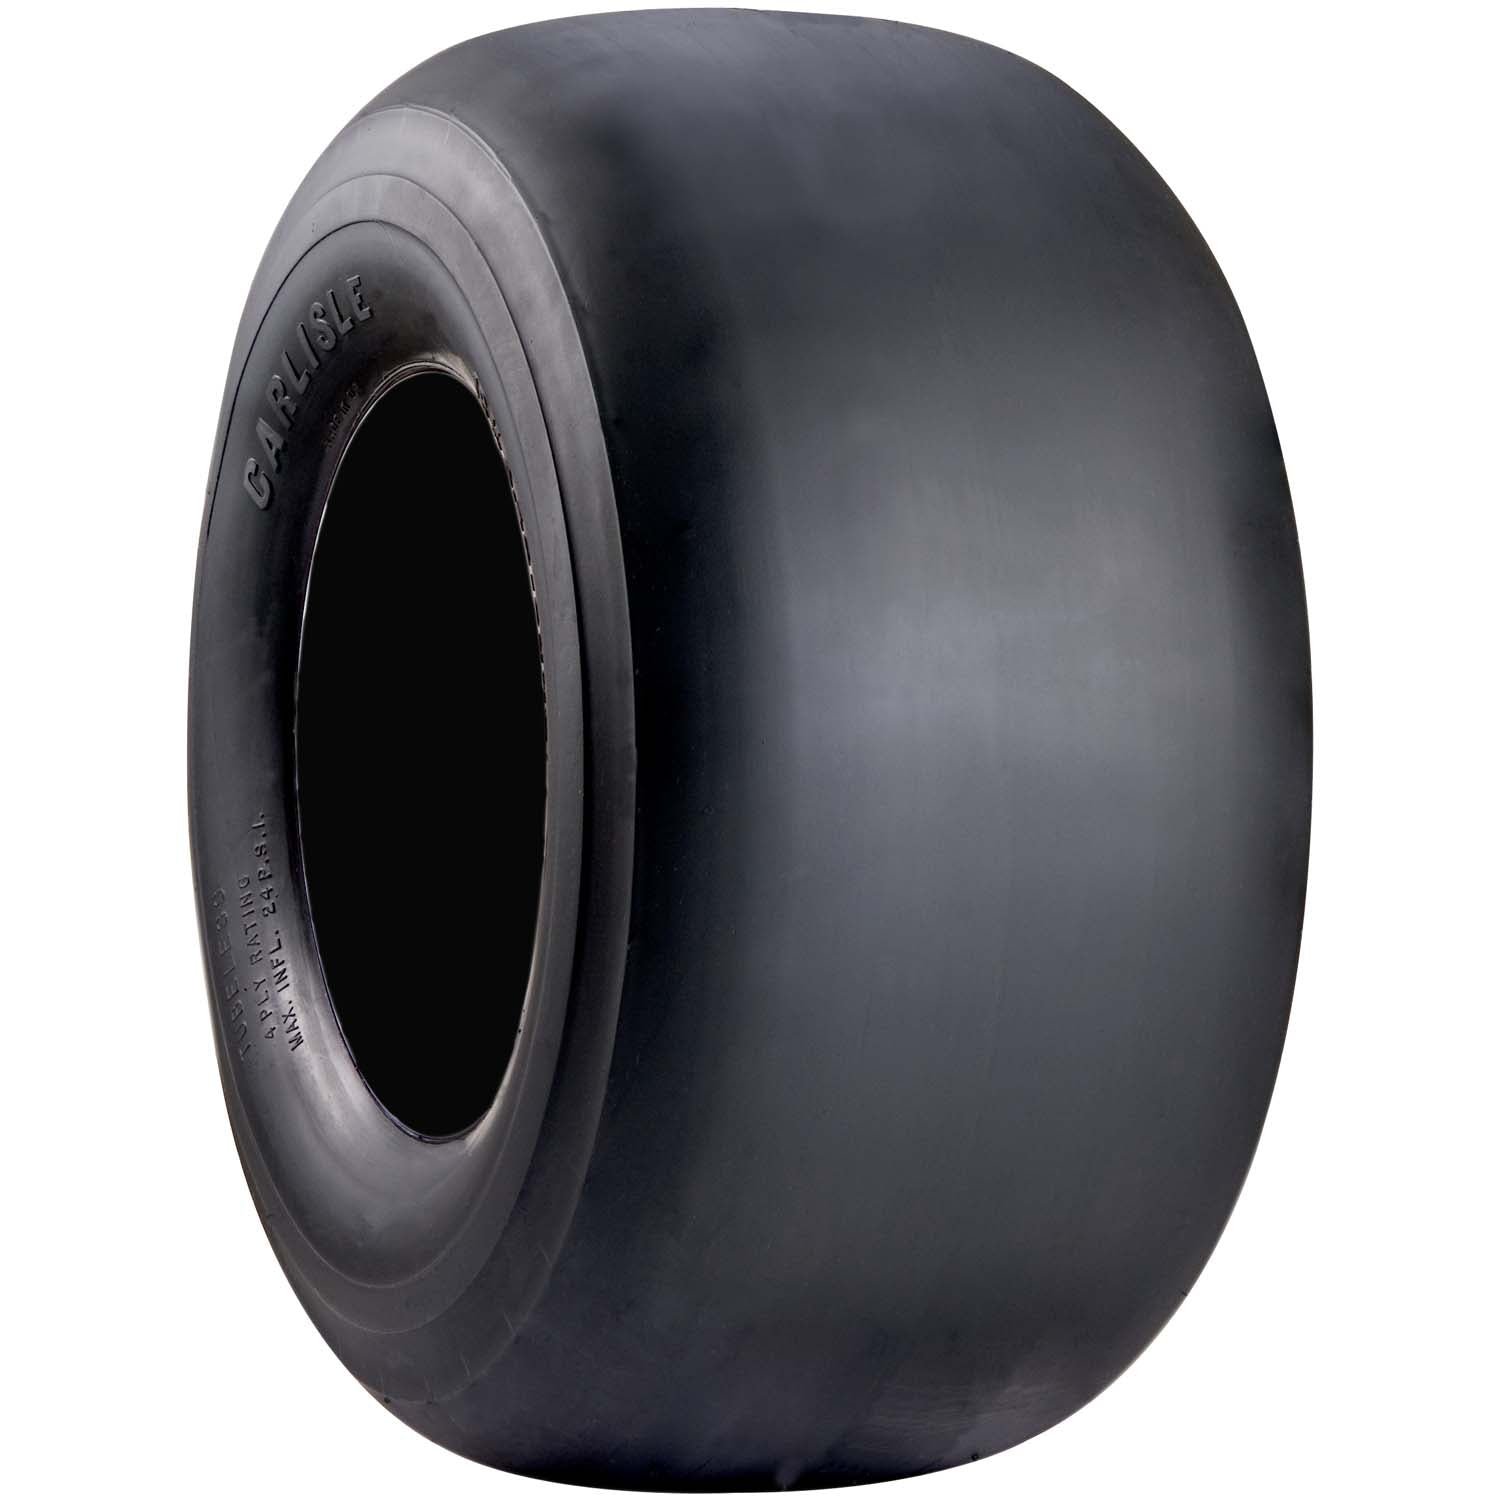 Carlisle Smooth Lawn and Garden Tire 4ply 13x5.00-6